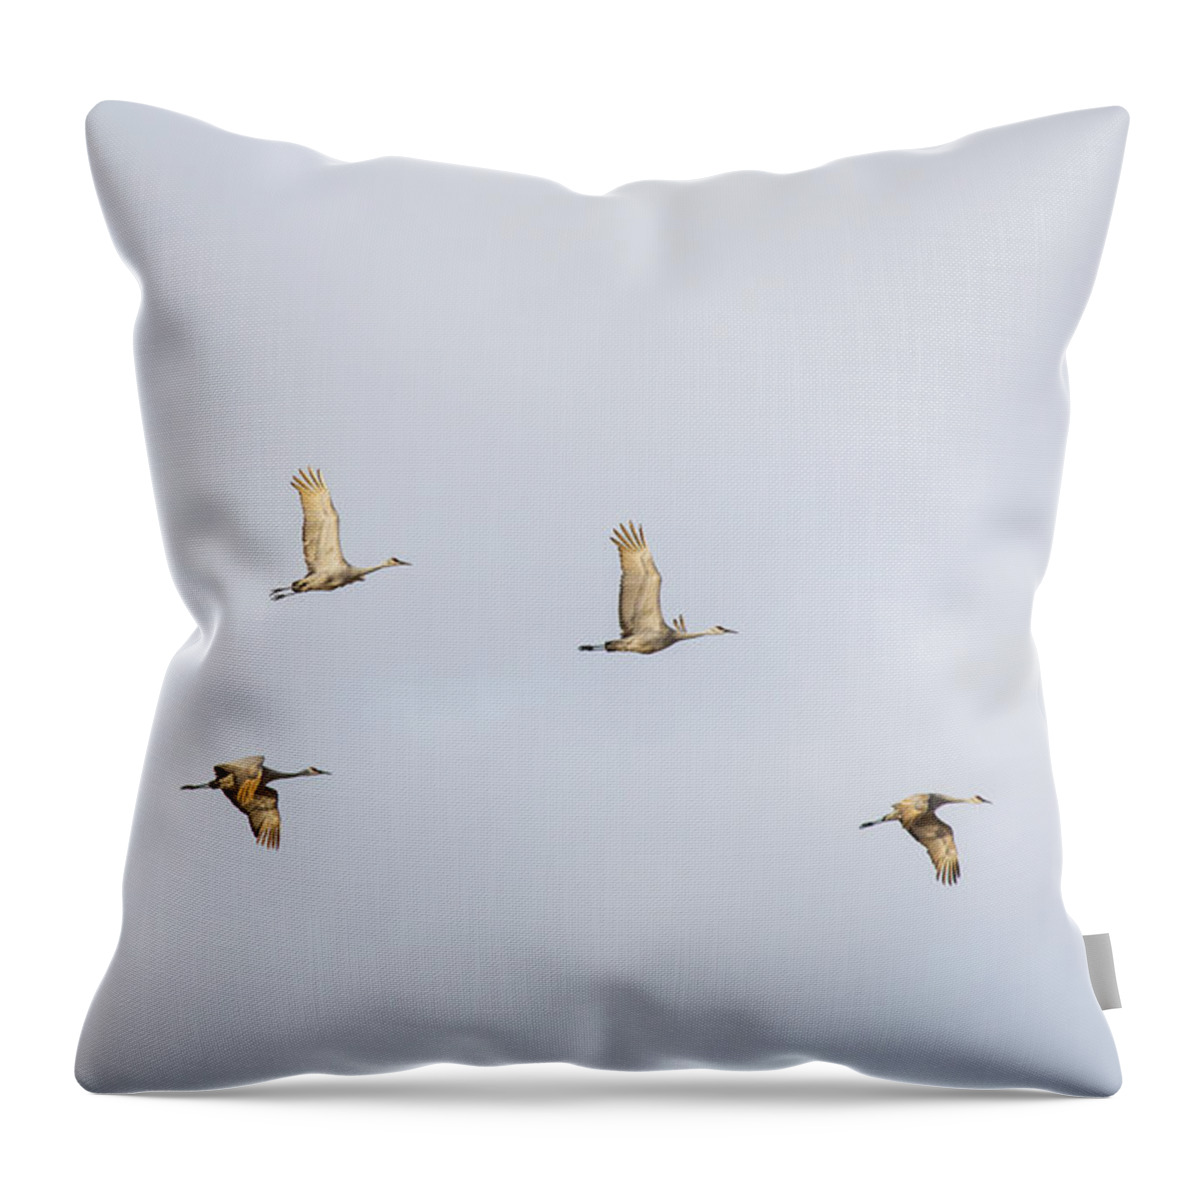 Sandhill Crane Throw Pillow featuring the photograph Spring Migration 3 by Kathy Adams Clark